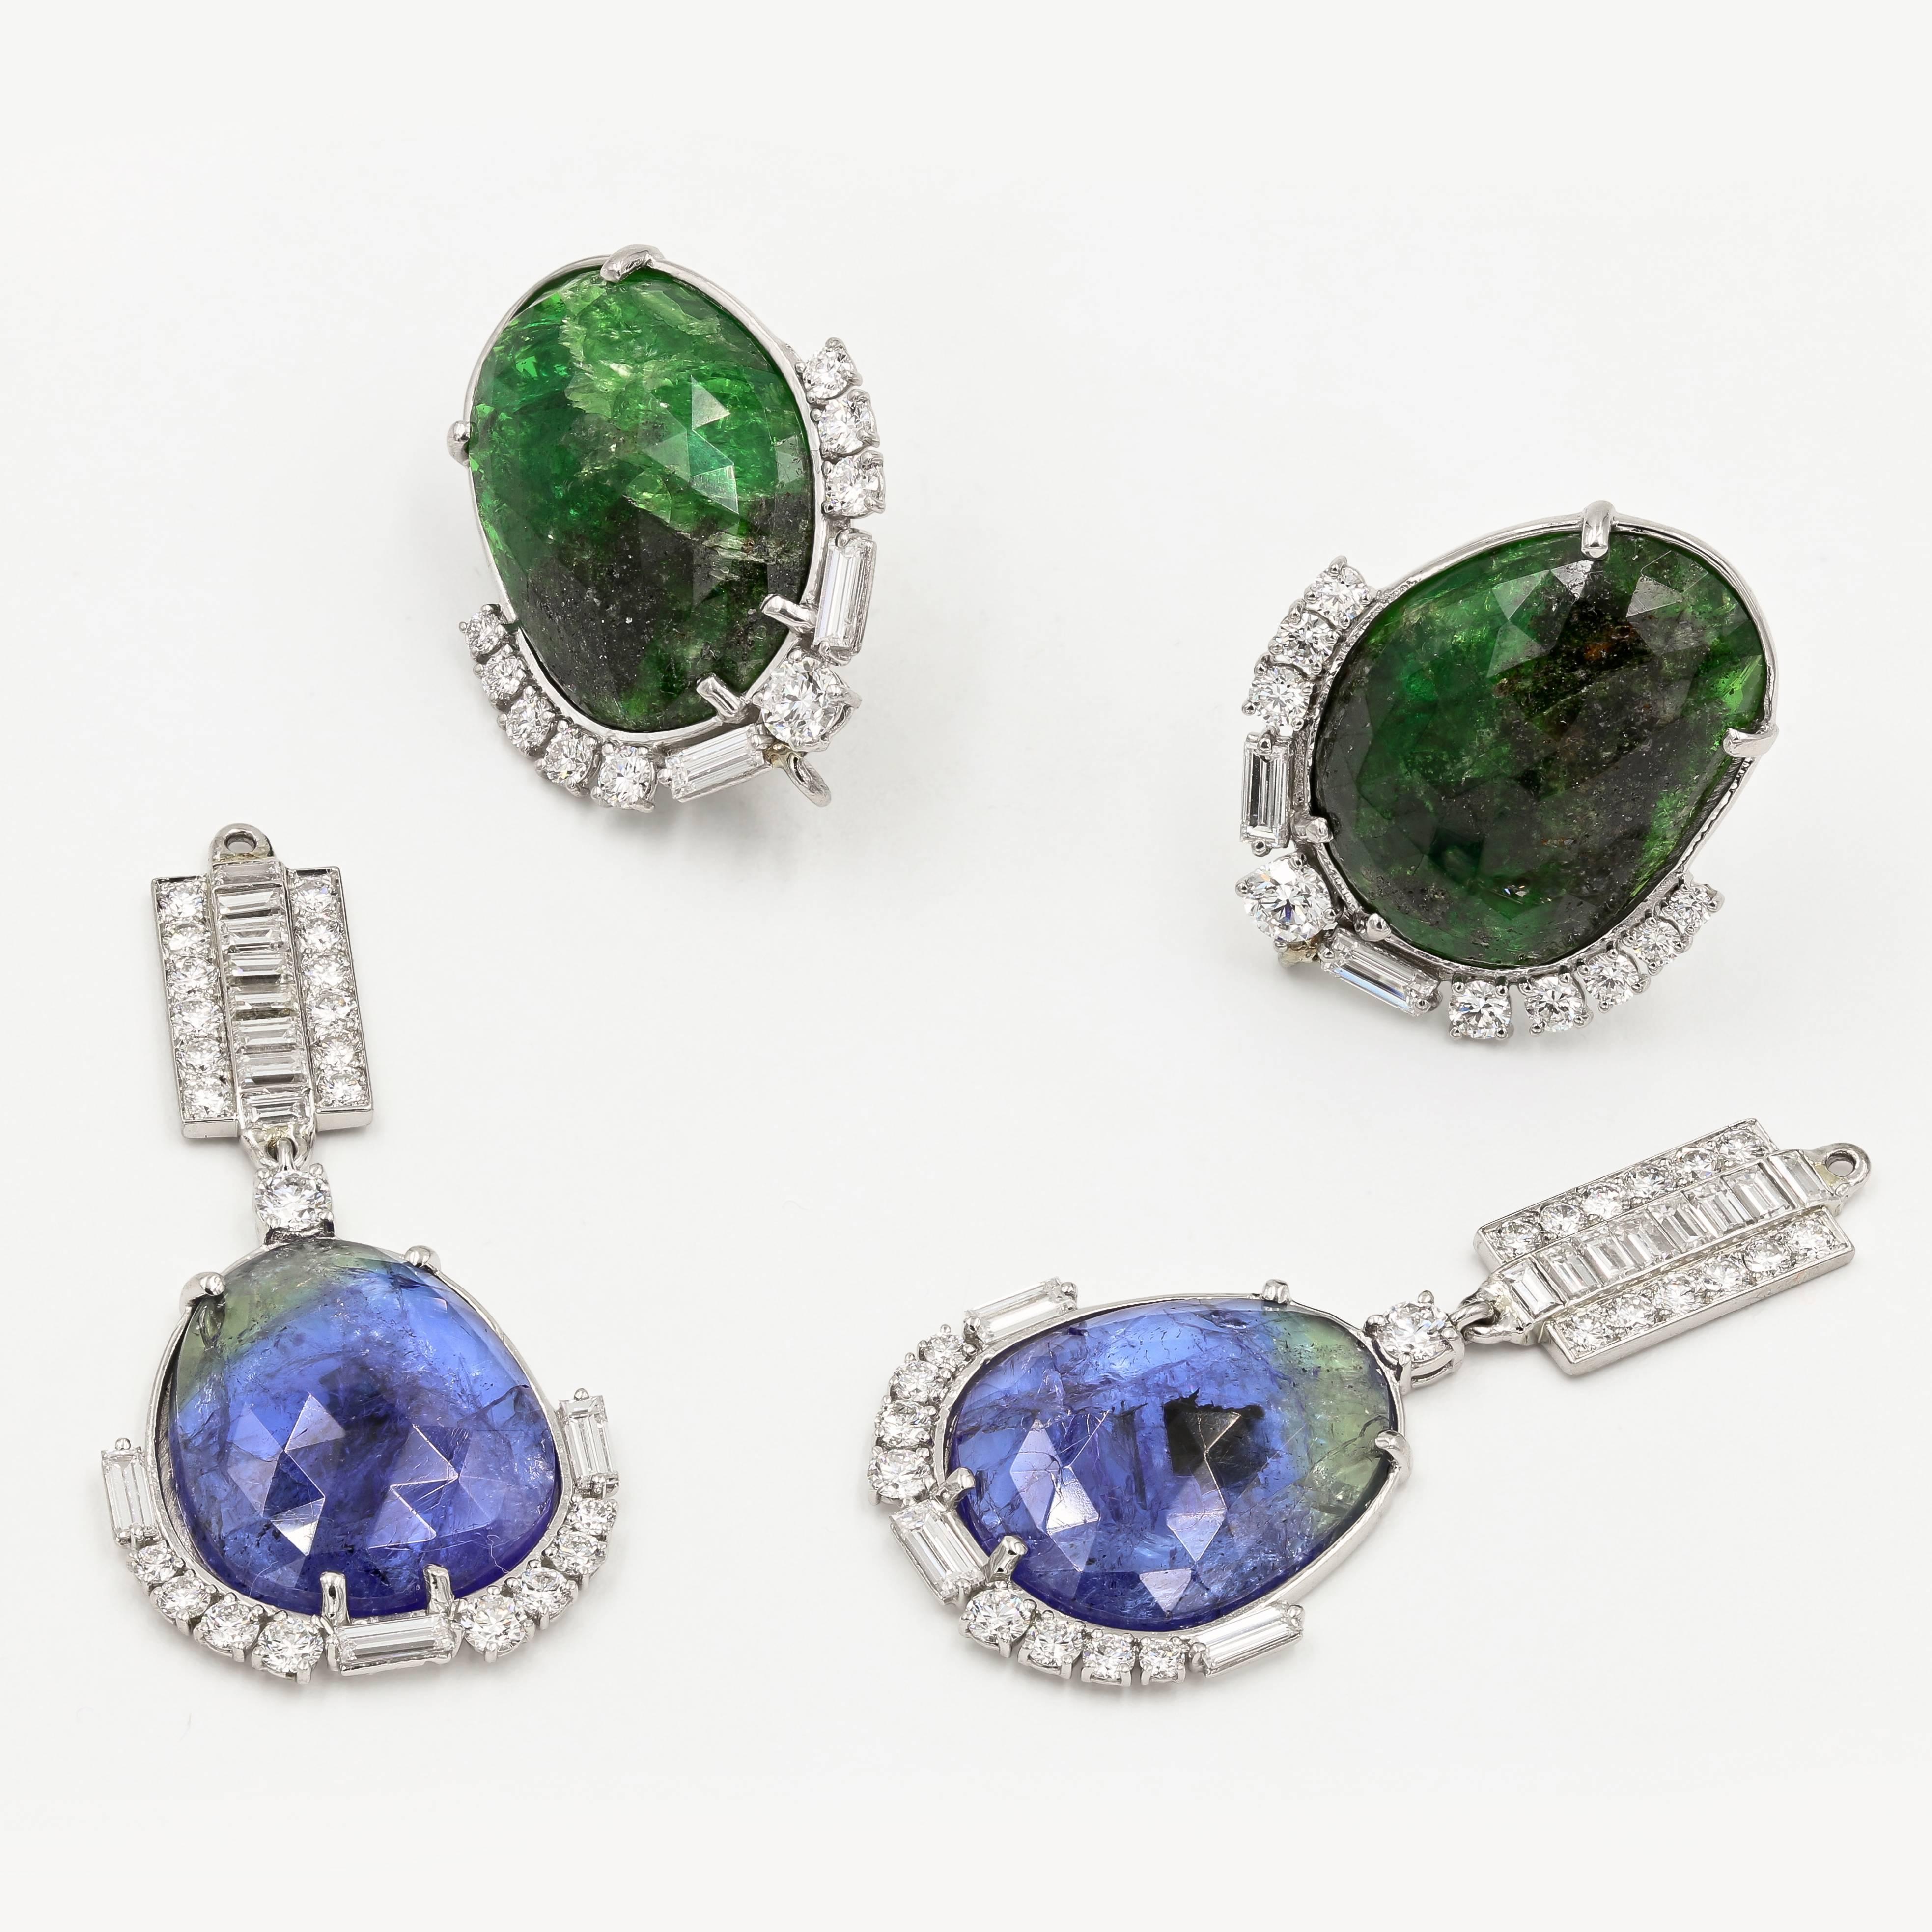 Contemporary Tanzanite, Tsavorite, & Diamond Earrings With Removable Section